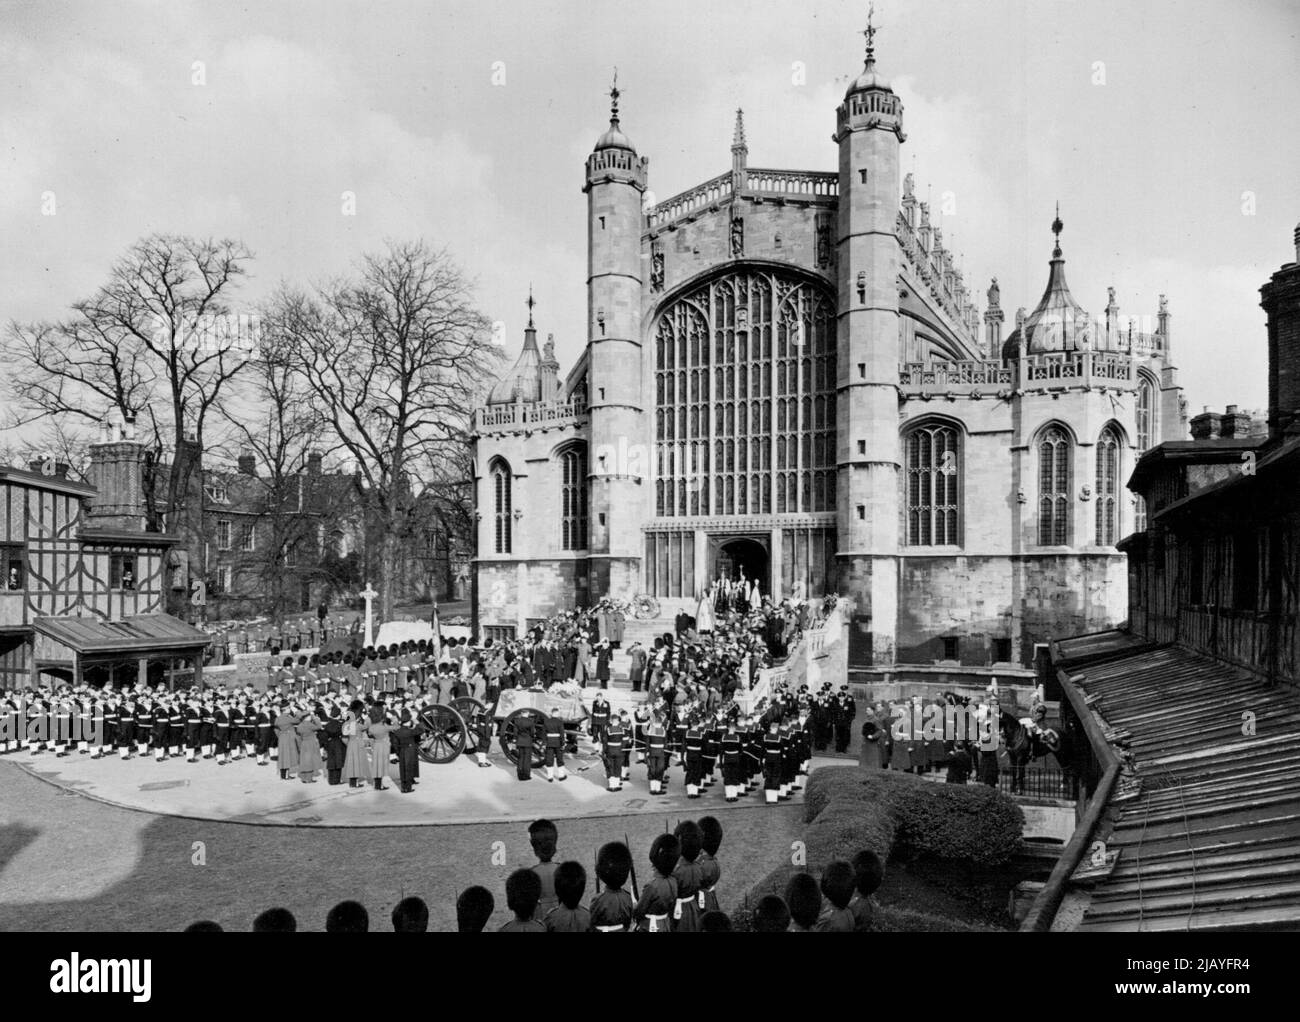 Burial Of King George VI At Windsor - A general view of the scenes as the coffin containing the body of King George VI arrives at the Chapel at St. George at Windsor Castle. At the top of the steps, the Archbishops of Canterbury and York, and other ecclesiastical dignitaries are waiting to receive the bier. February 15, 1952. (Photo by Fox Photos). Stock Photo